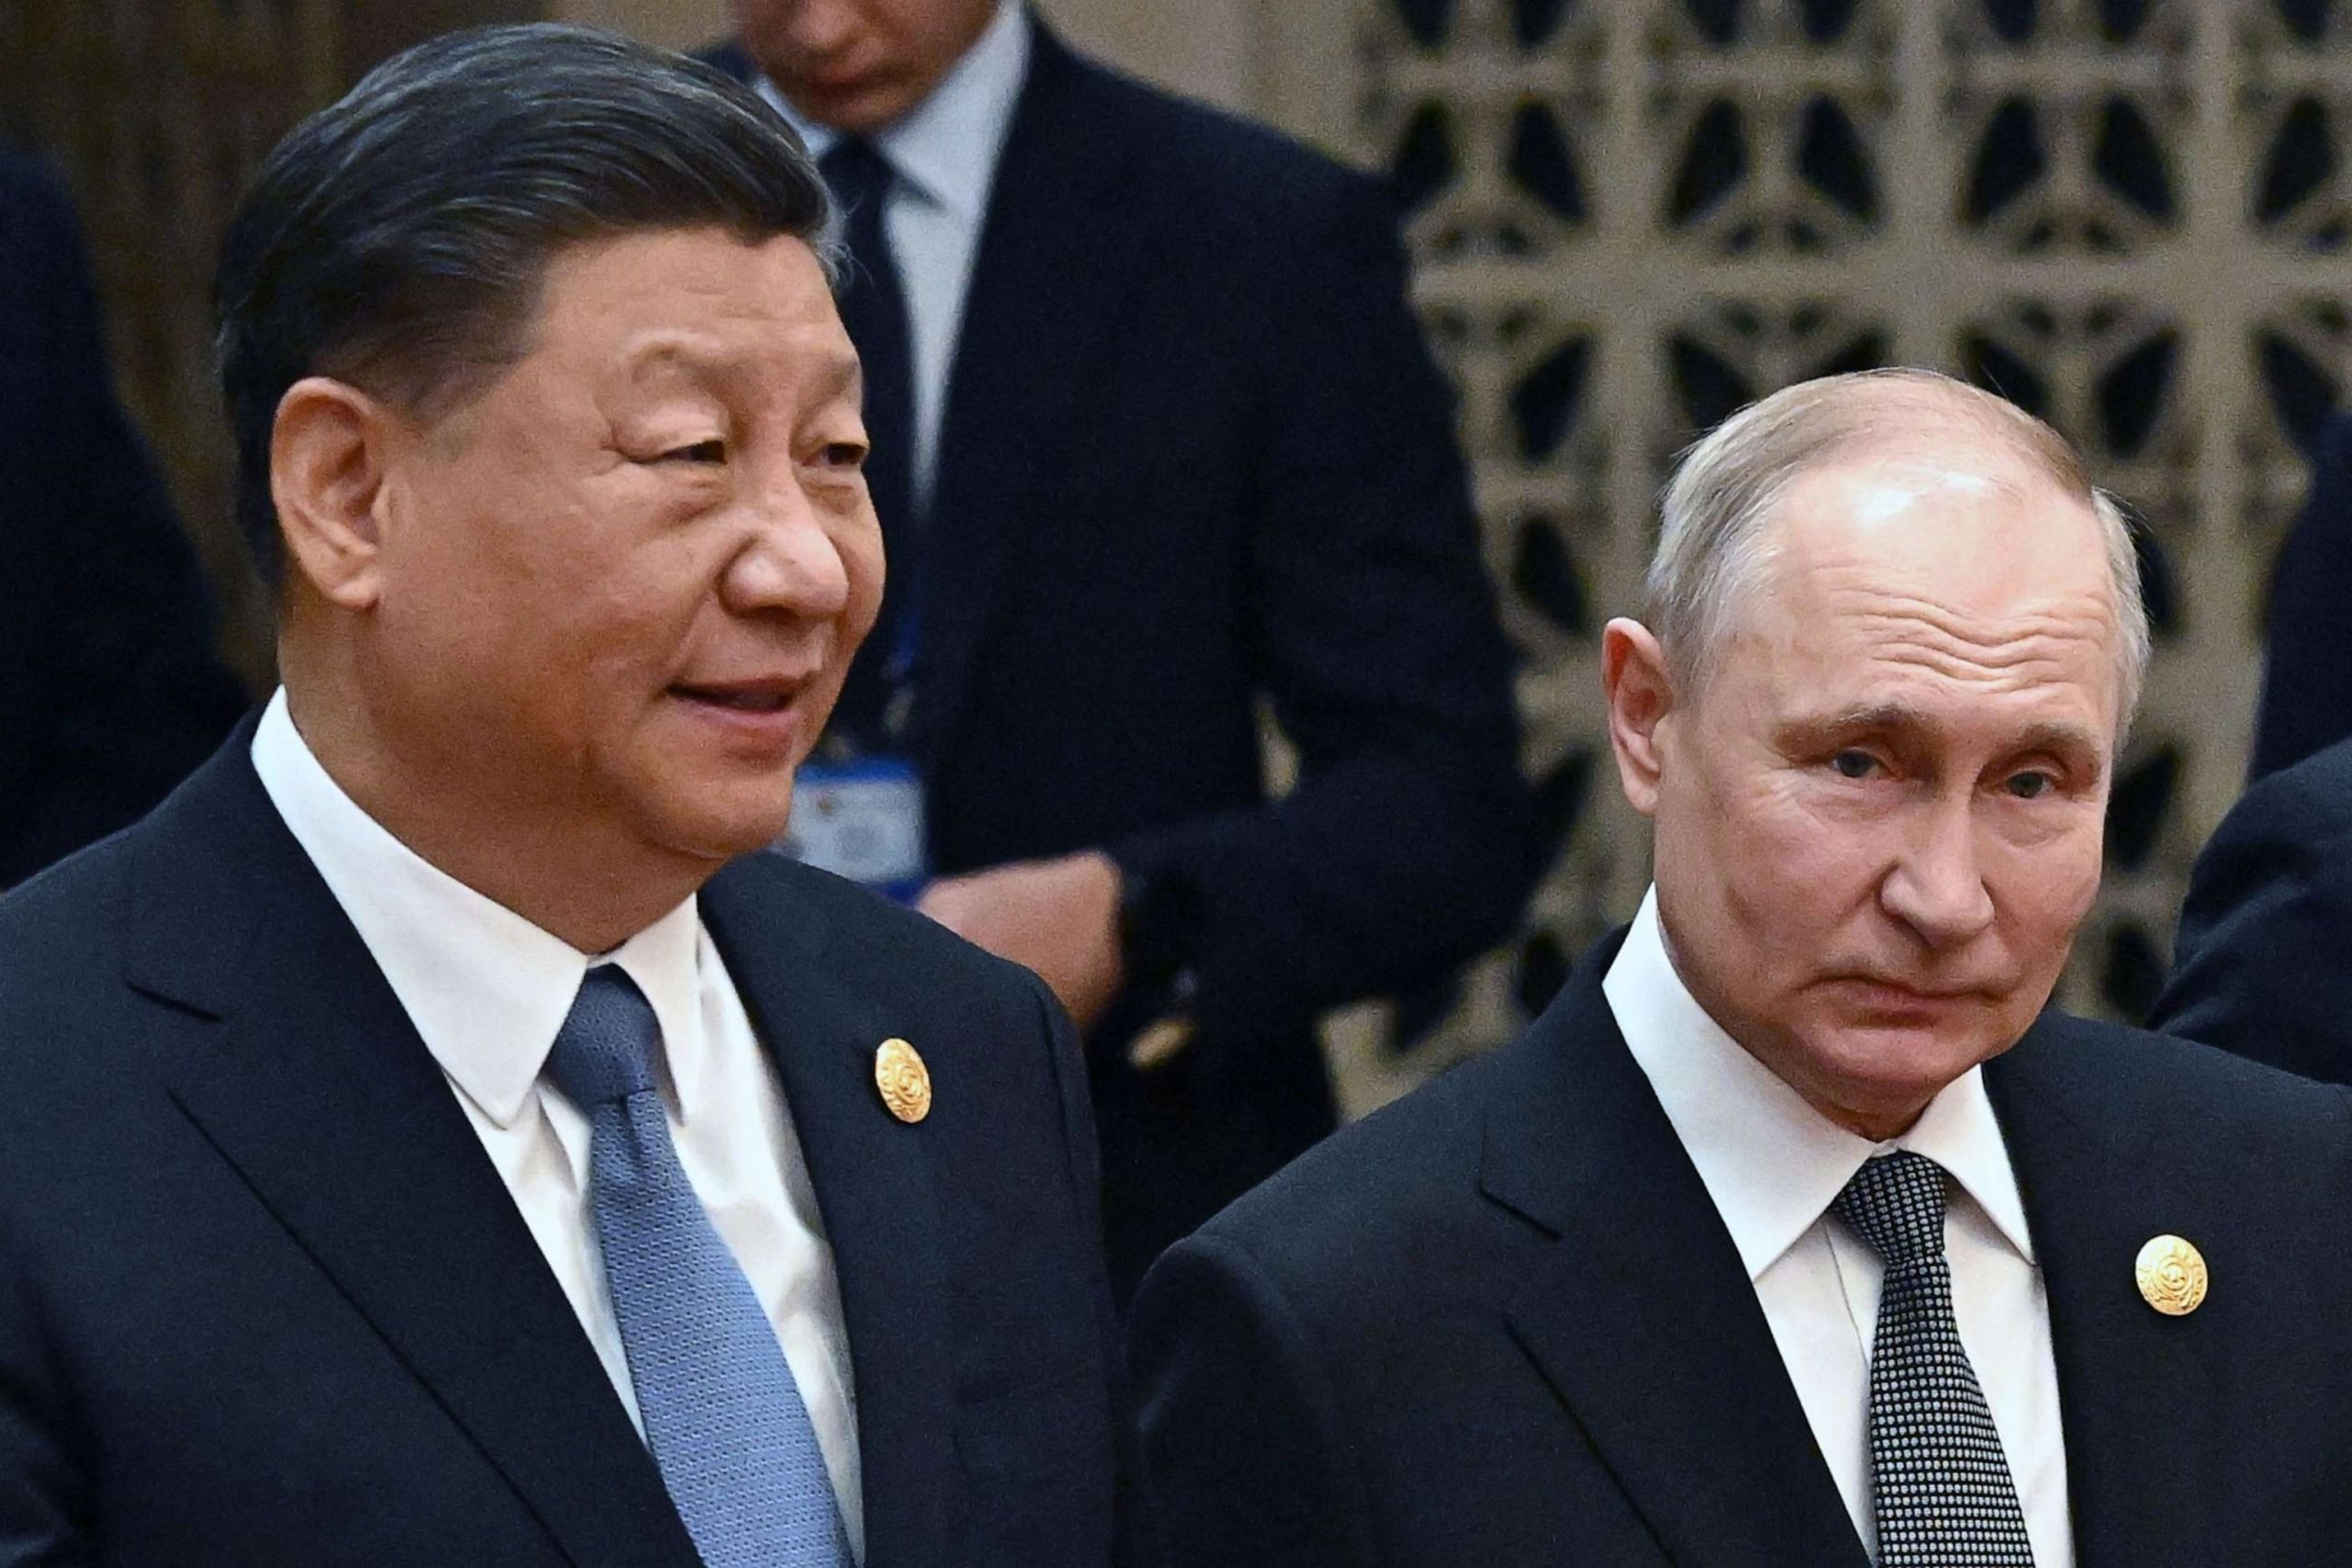 Conference in China highlights the 'deepening' relations between Beijing and Moscow, as detailed by Xi and Putin